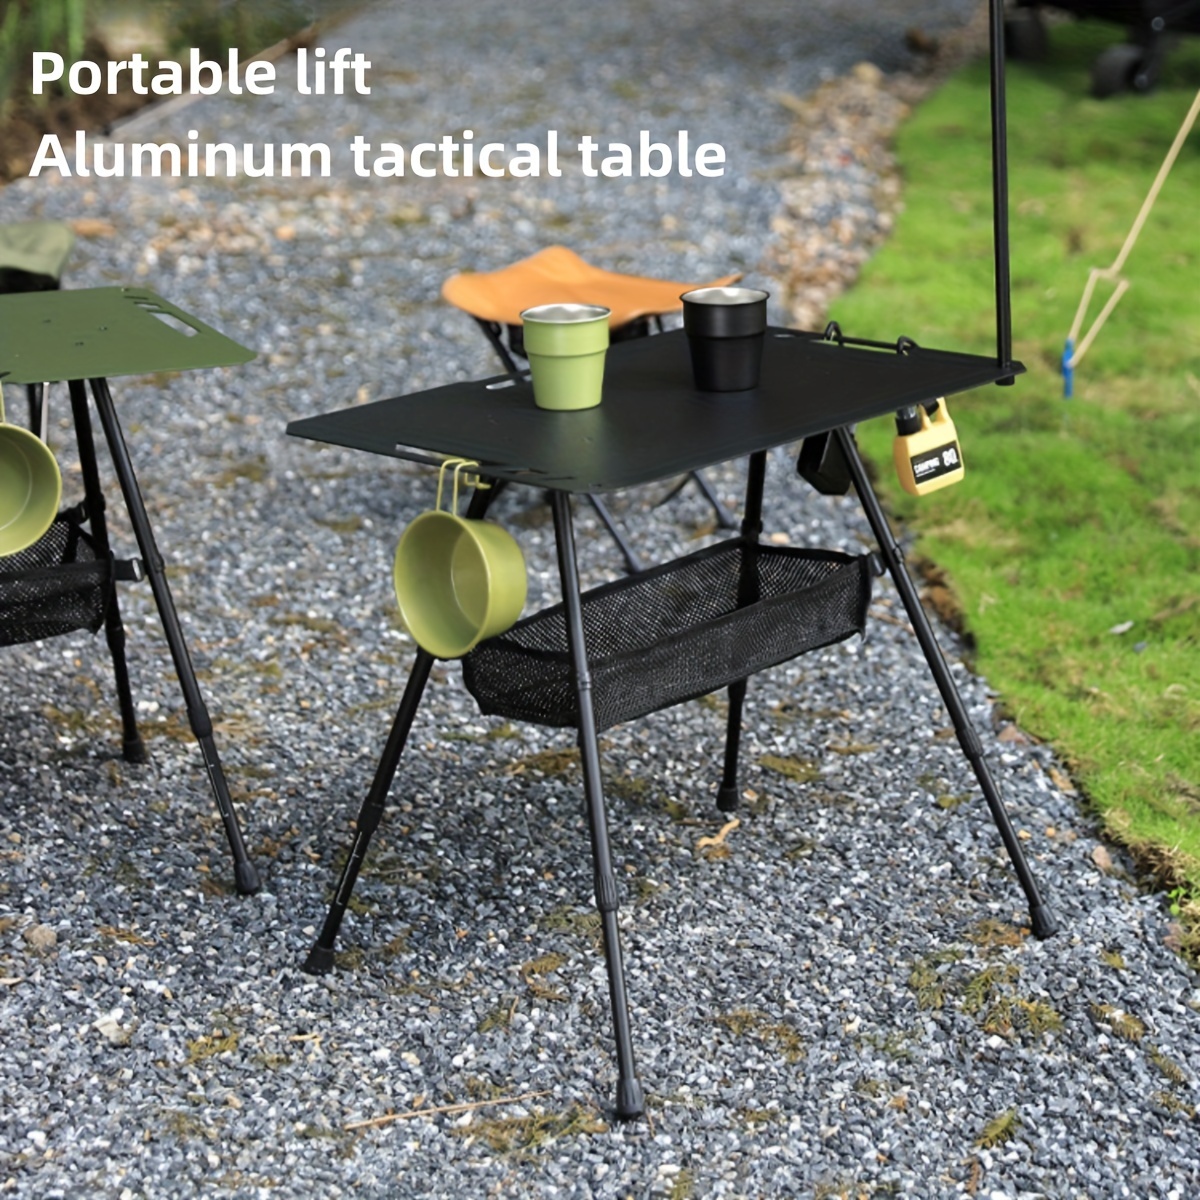 

Outdoor Super Light Tactical Table Foldable Portable Lifting Igt Table Lightweight Camping Equipment Ins Picnic Table